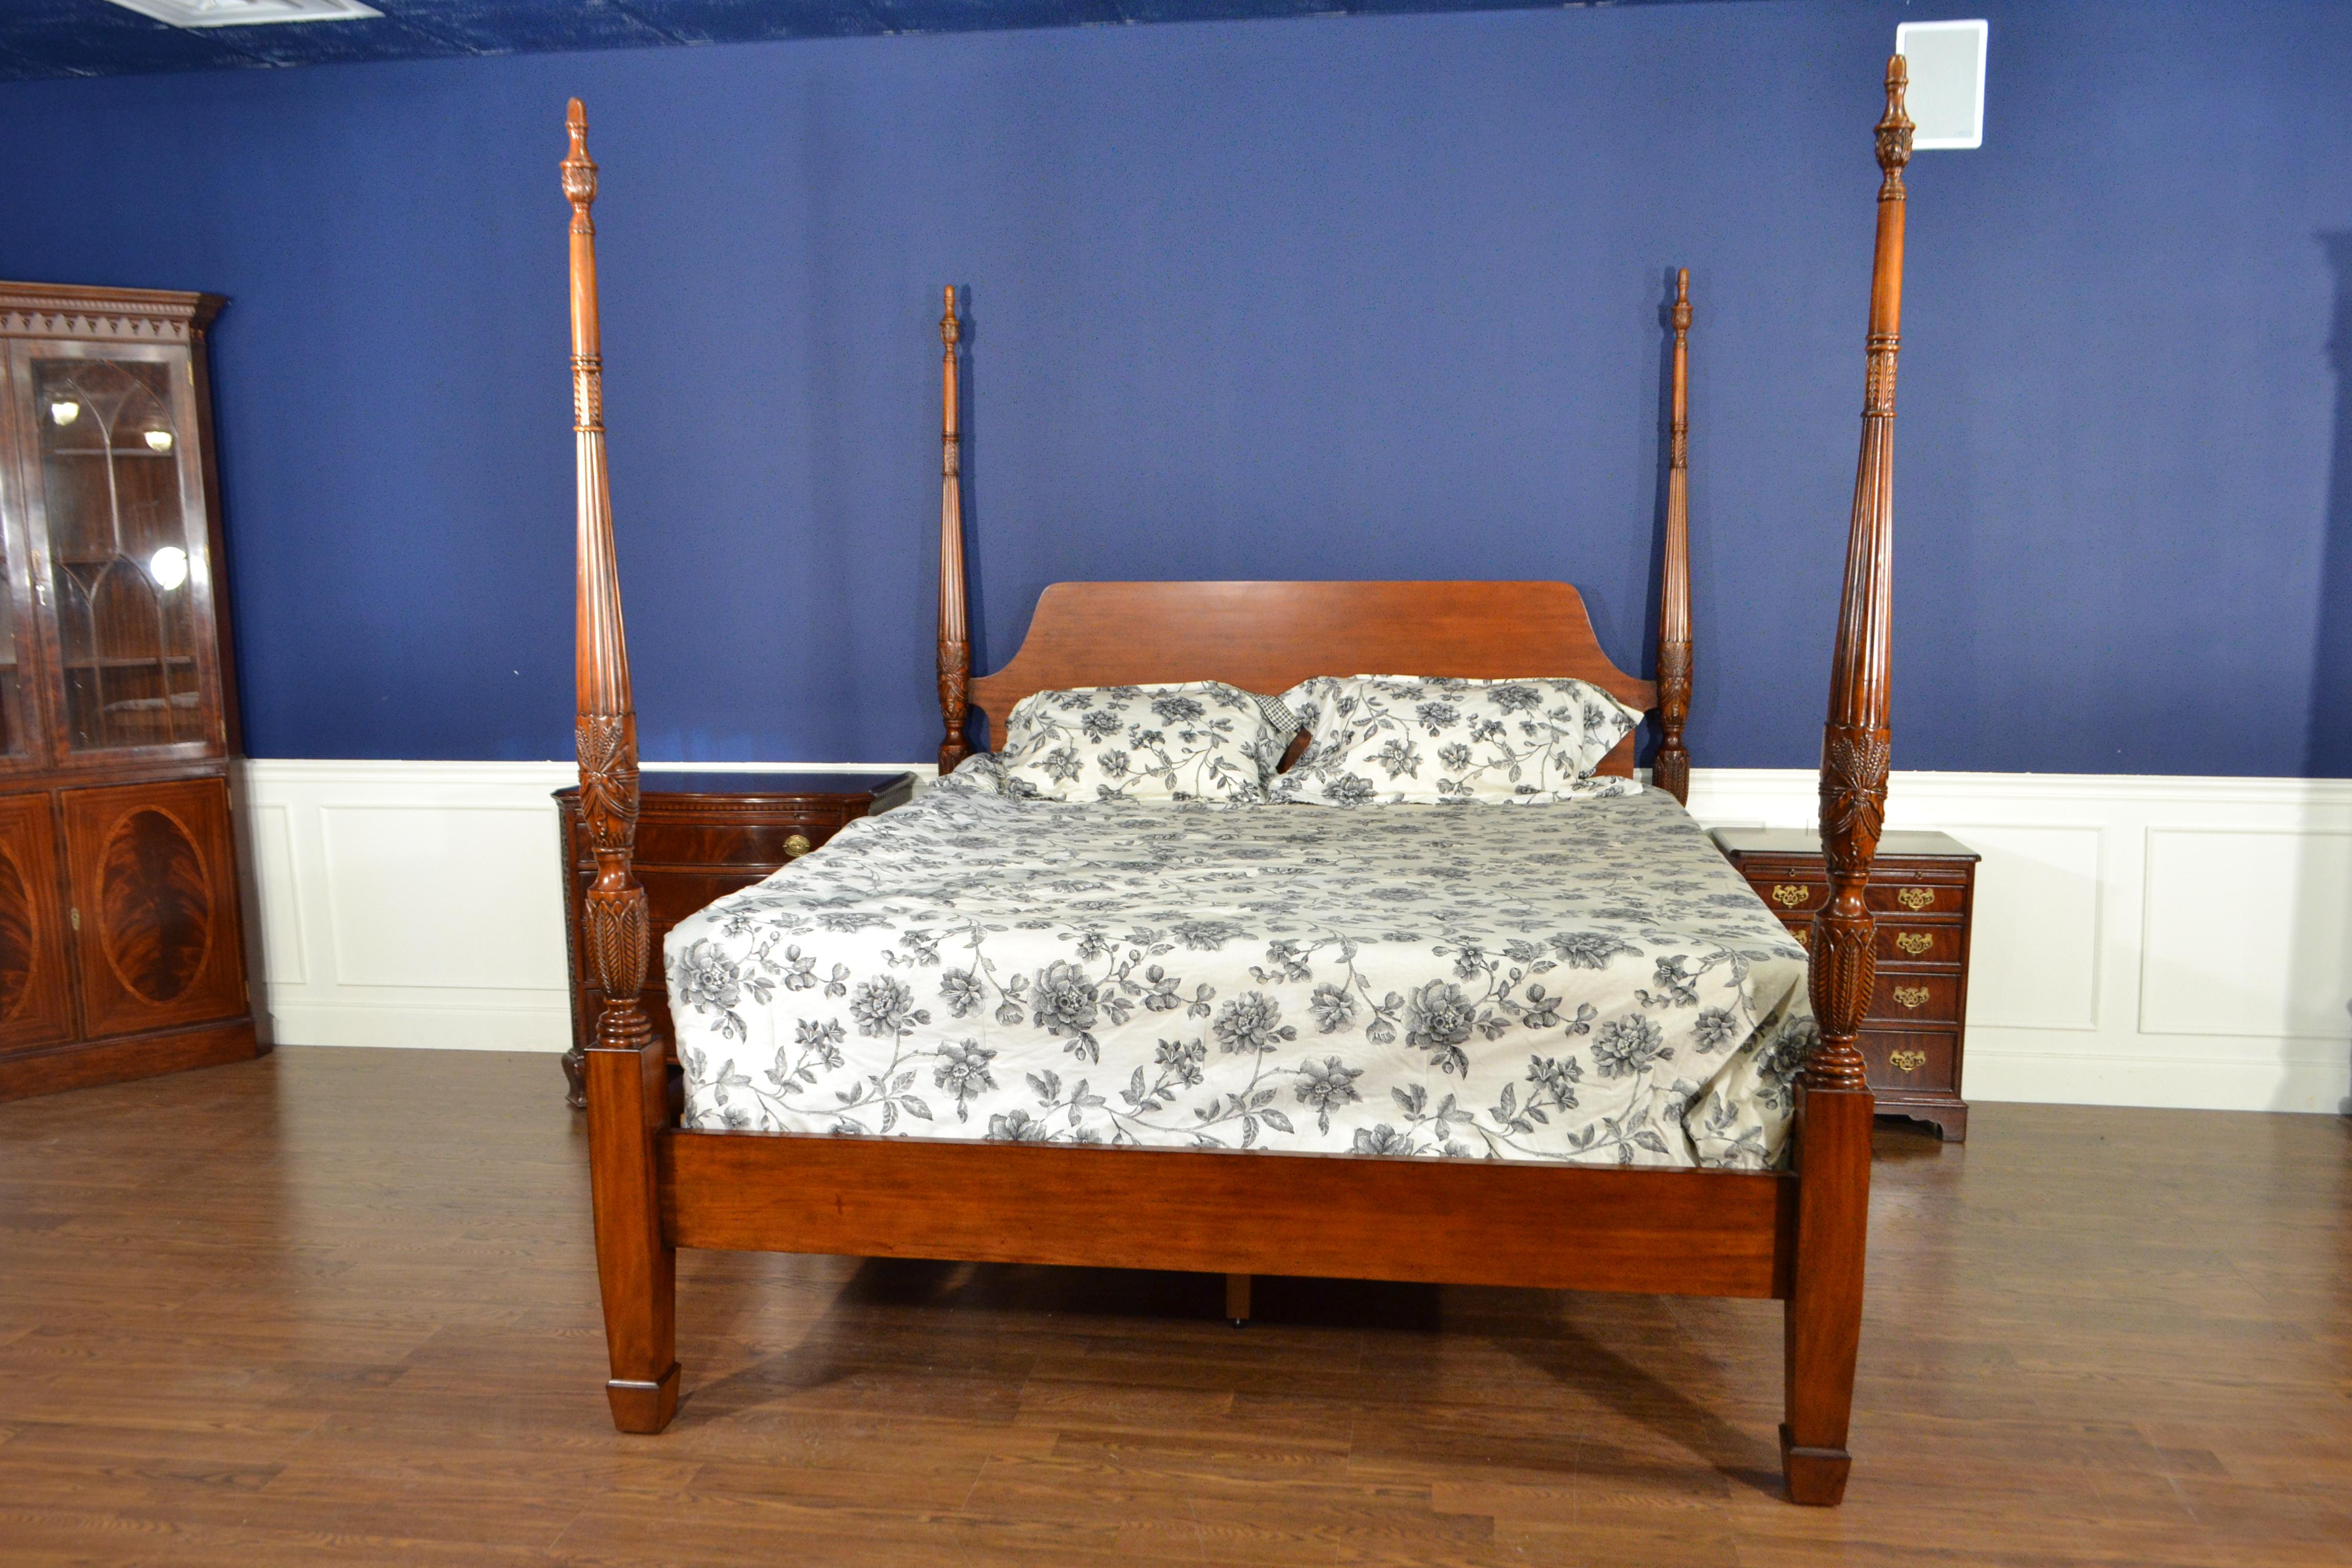 This is a new traditional king size mahogany rice carved poster bed by Leighton Hall Furniture. It’s design was inspired by poster beds from the Regency period and features handmade rice carved posts which are fluted and tapered and a straight grain